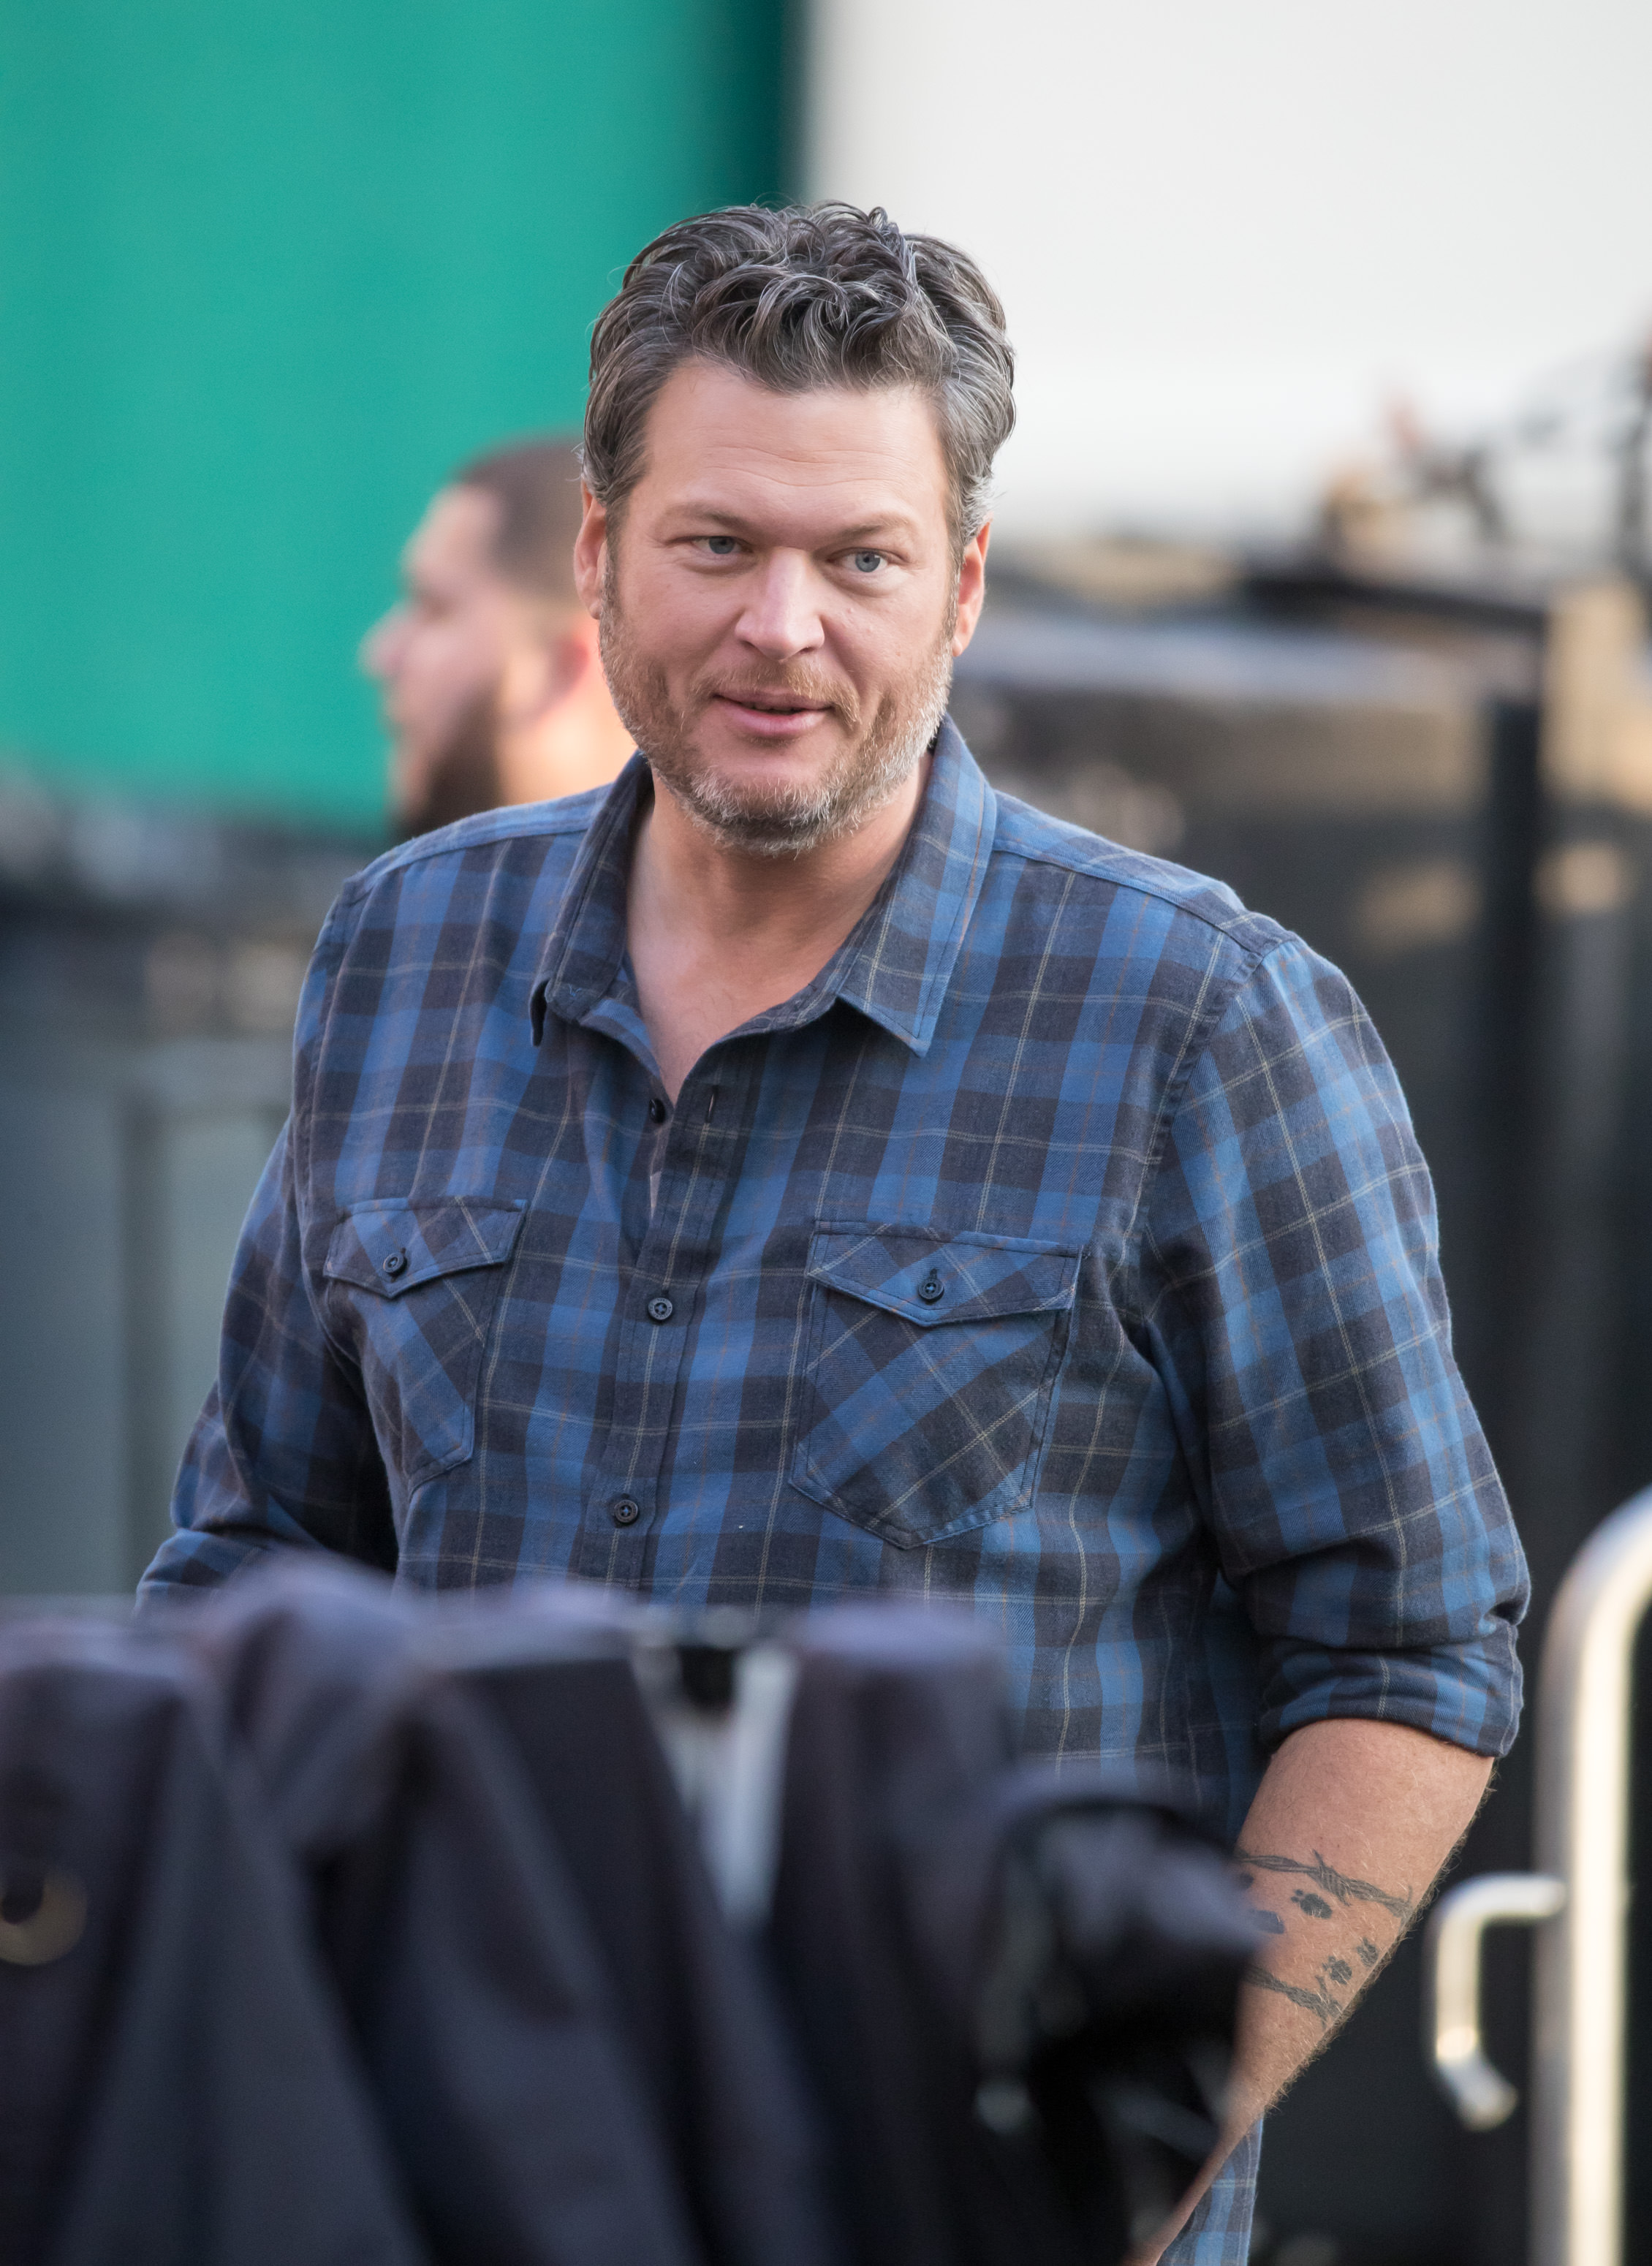 Blake seemed somber as he answered back to Gwen's 'Hello?' amid rumors the two may be having issues in their marriage